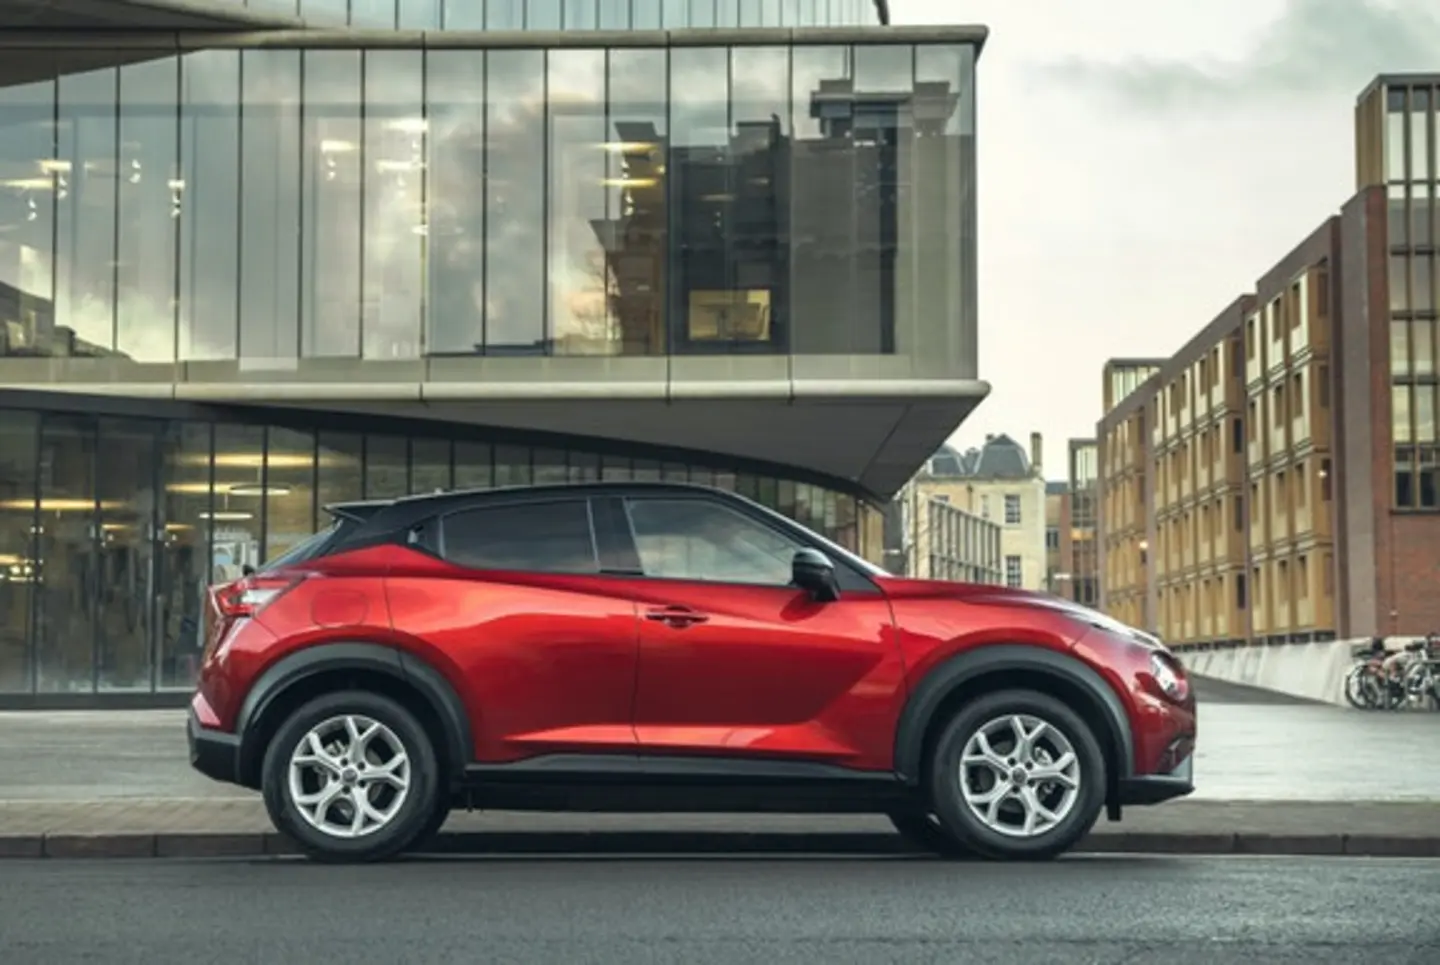 Red Nissan Juke parked in front of an office building